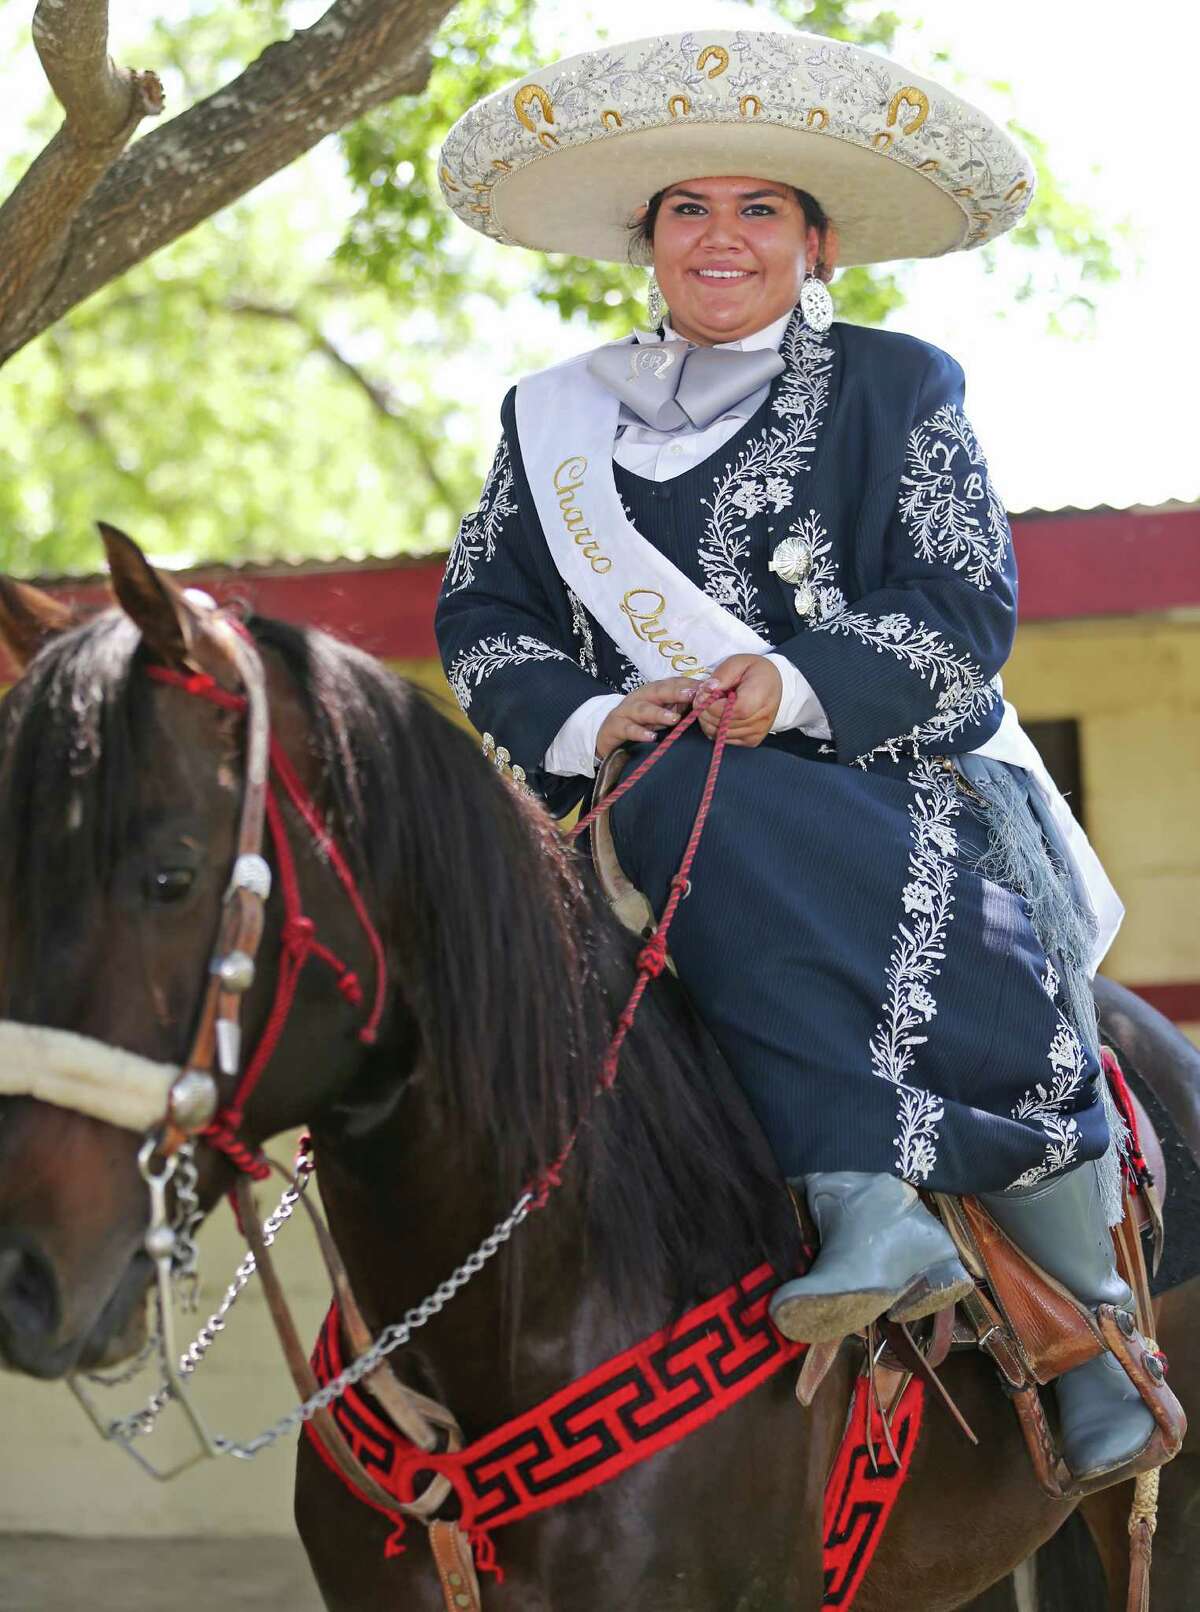 Charro Queen Yazmin Bernal, 17, addressed the crowd from horseback during the event, put on by the San Antonio Charro Association to showcase Mexico’s cowboy and cowgirl traditions and their connection to the city.